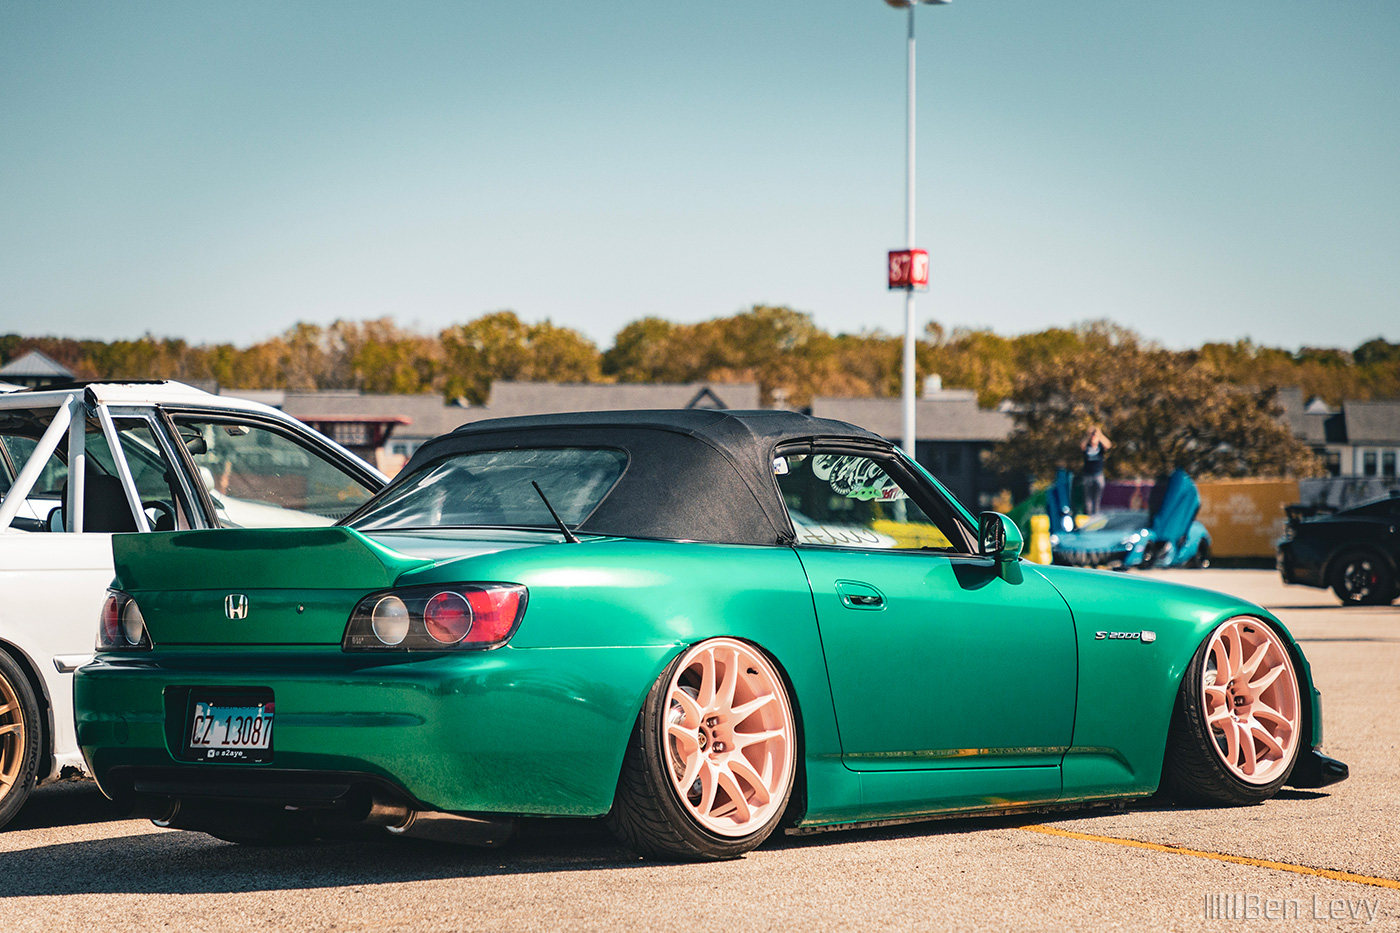 Green Wrap on S2000 at North Suburbs Cars & Coffee